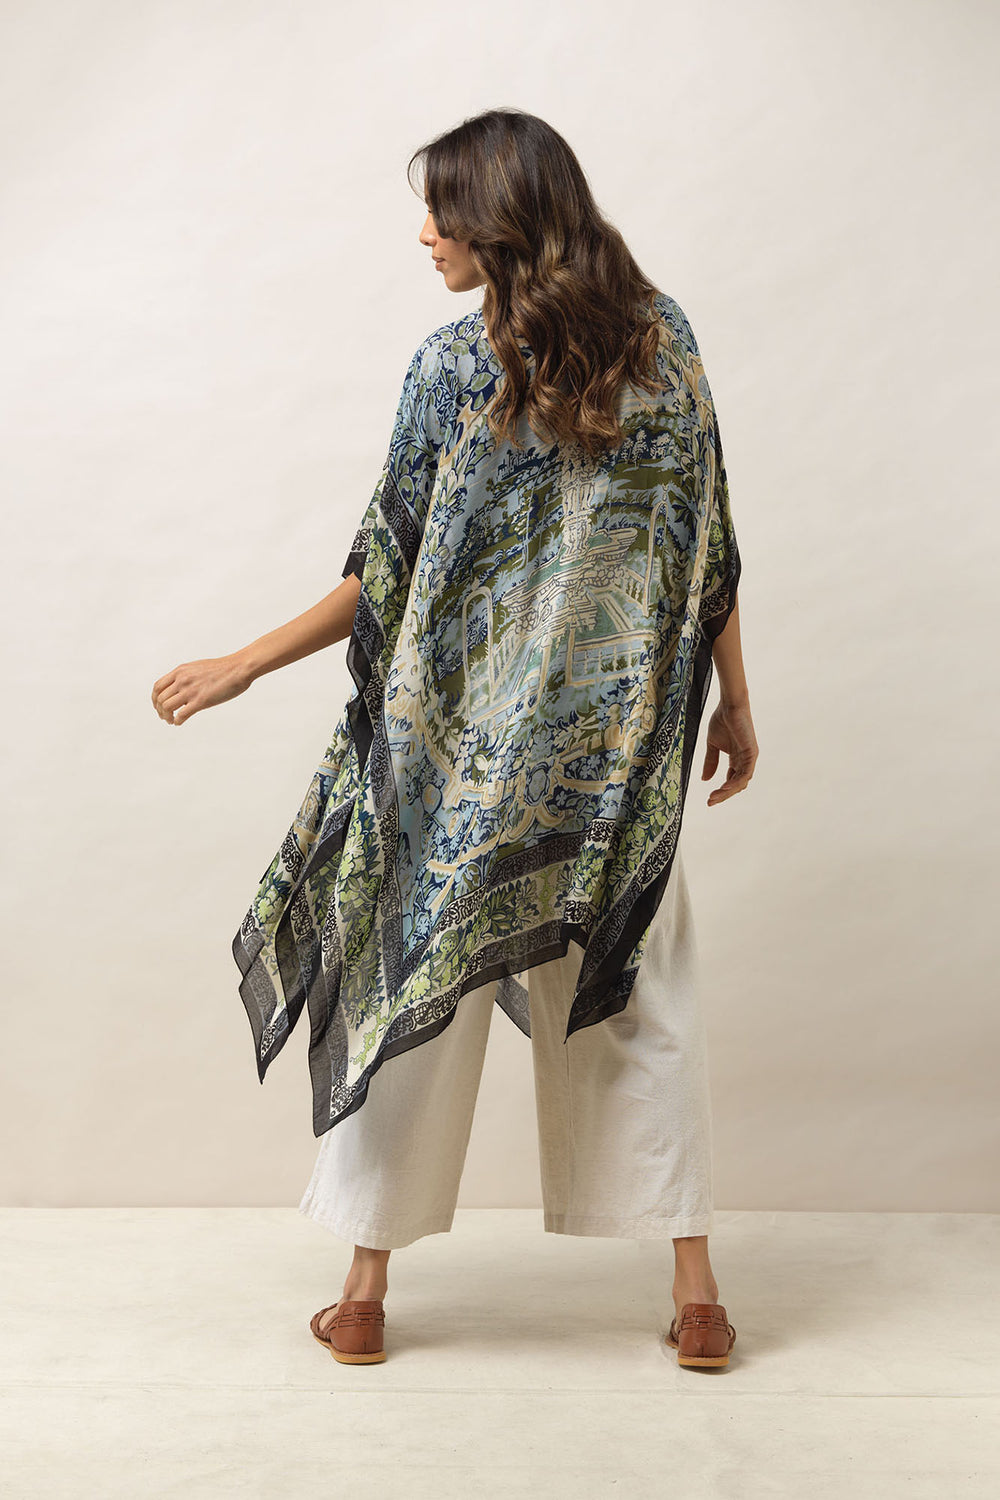 Women's lightweight throwover shawl in tapestry sea blue print by One Hundred Stars